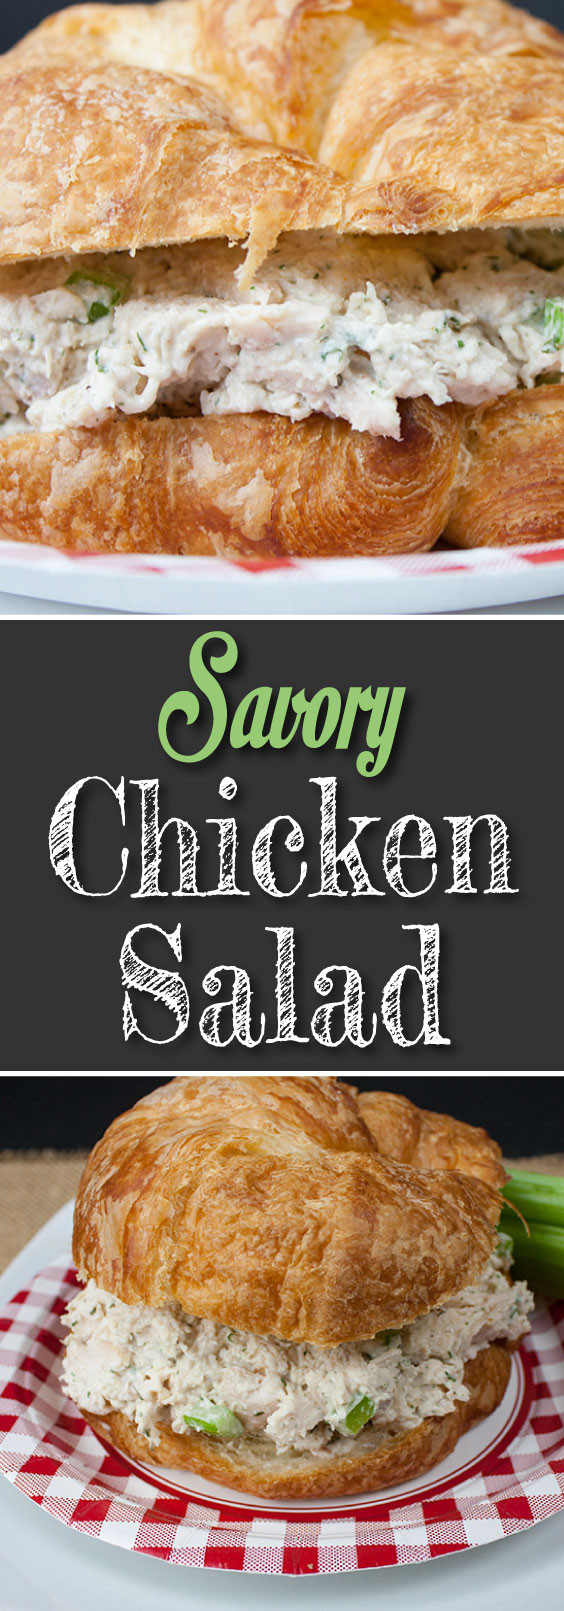 Savory Chicken Salad Luxury Savory Chicken Salad Quick and Easy Don T Sweat the Recipe